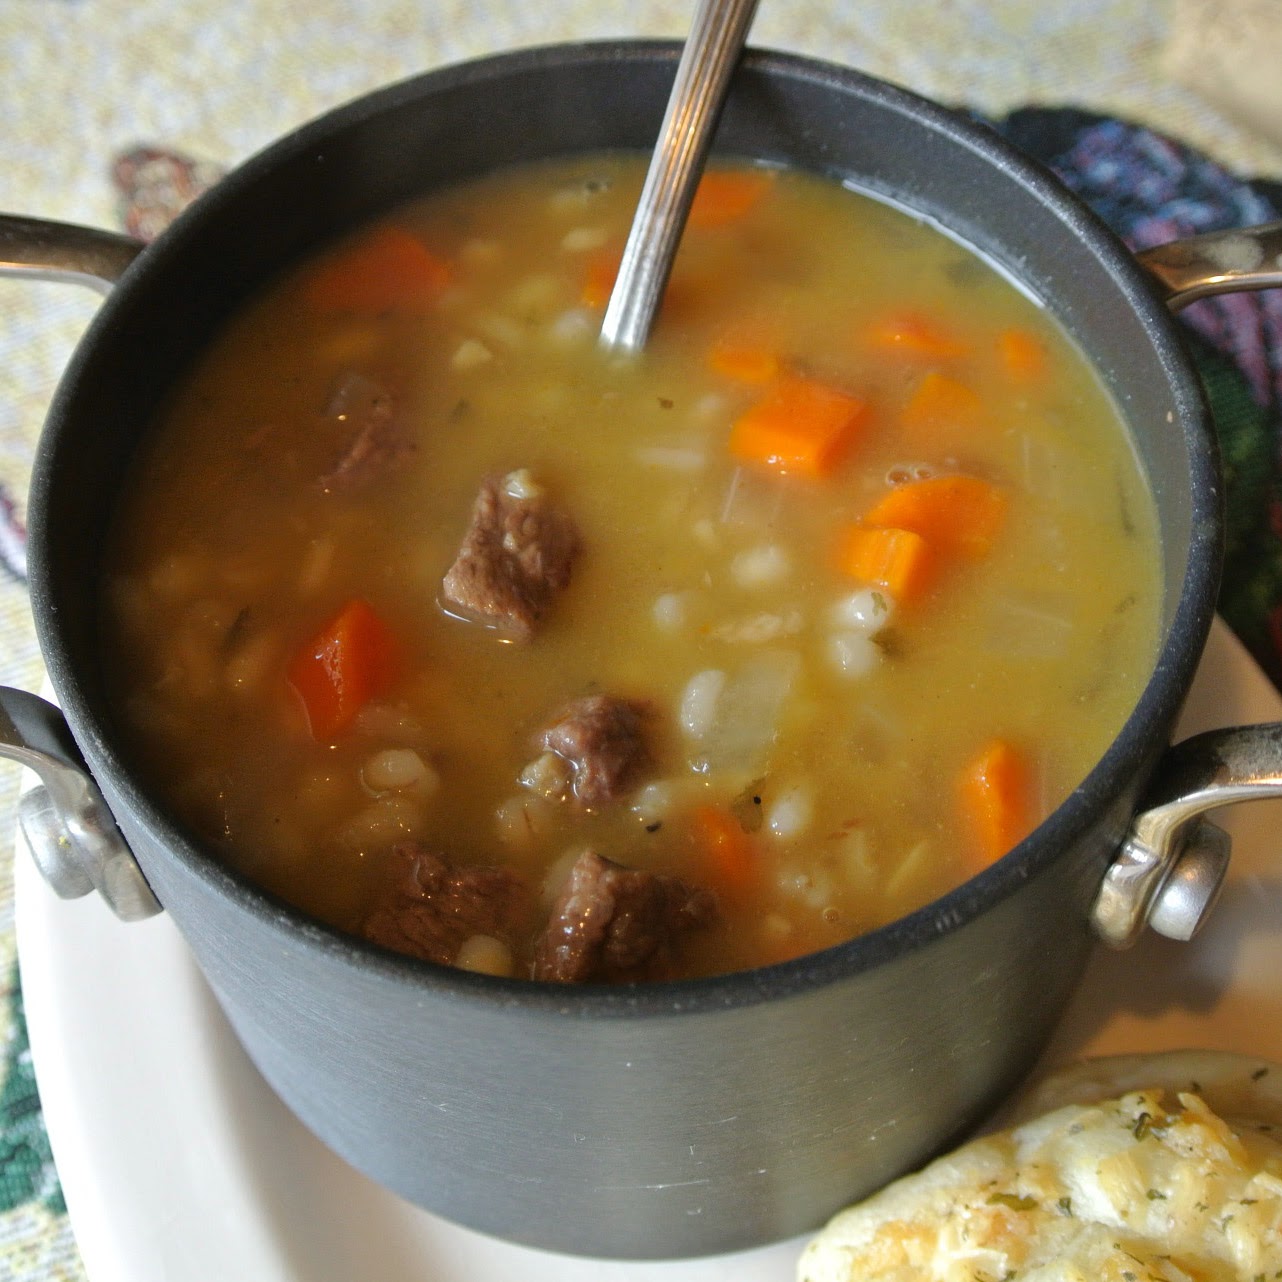 Gourmet Cooking For Two: Beef barley soup